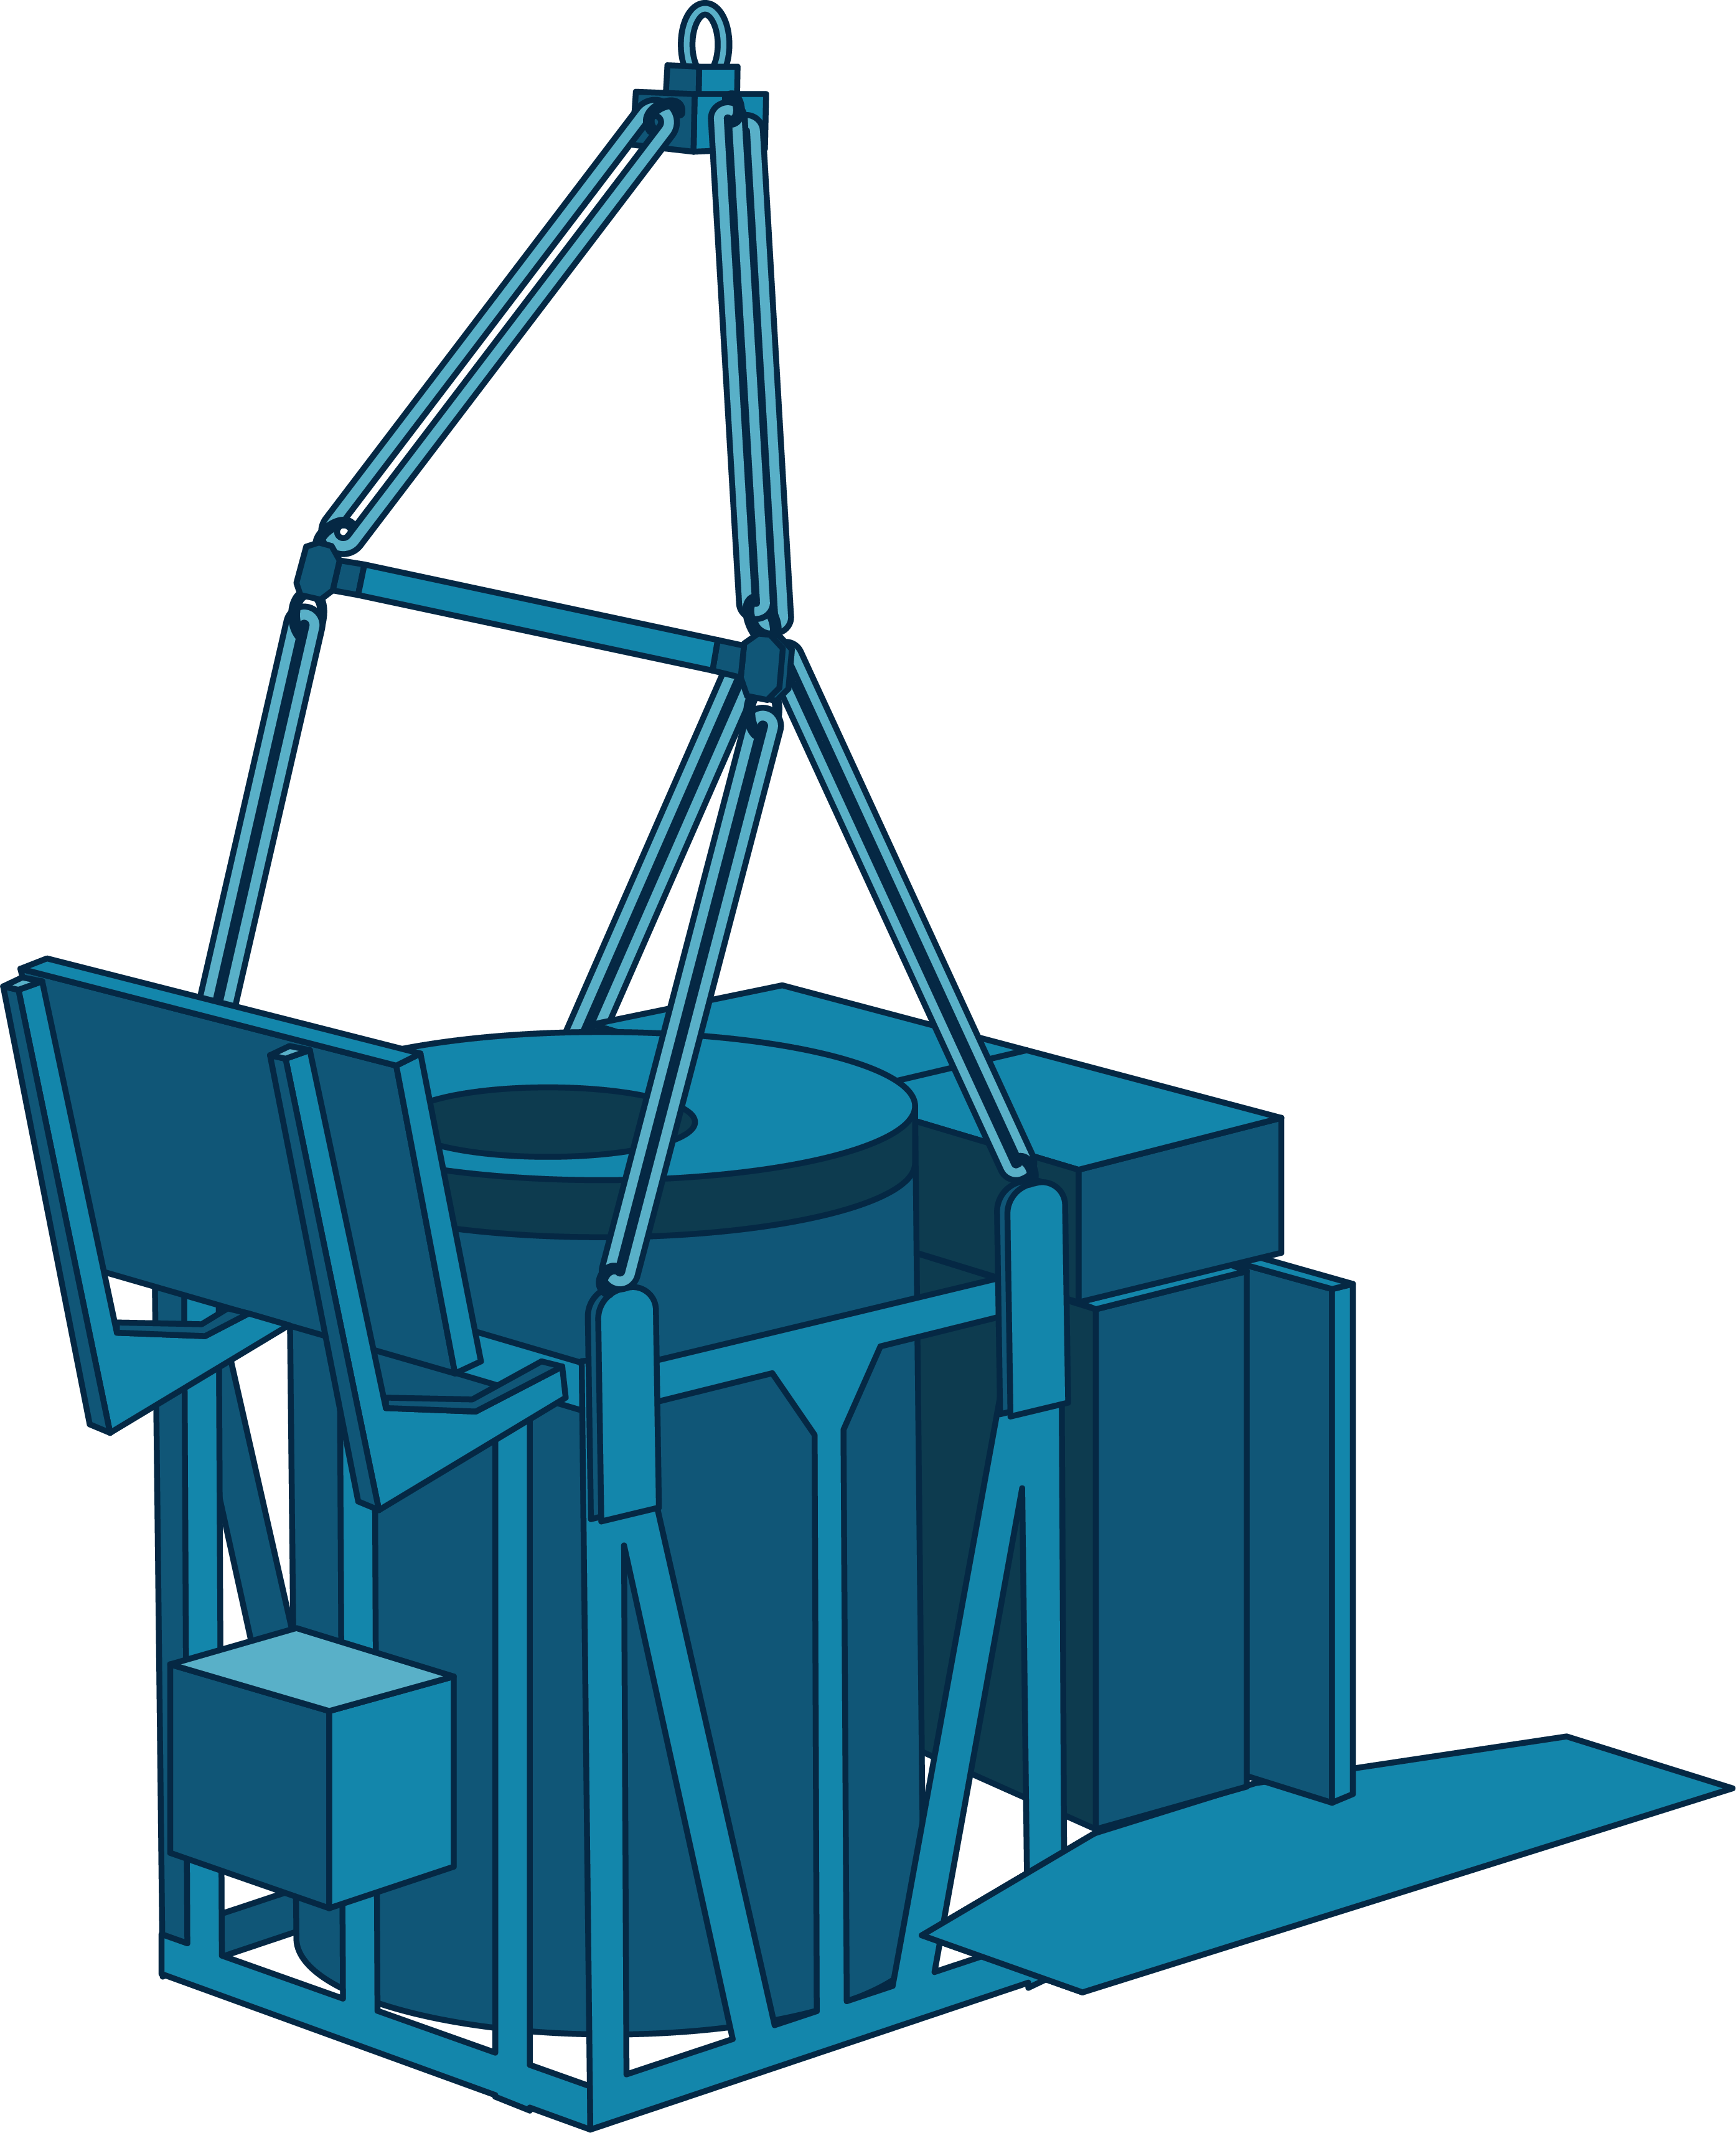 An illustration in multiple shades of blue depicting EXCLAIM. The instrument is made up of a hollow cylindrical object next to a rectangular object. The whole instrument sits within a framework that extends upwards to a point, where it will attach to a balloon.